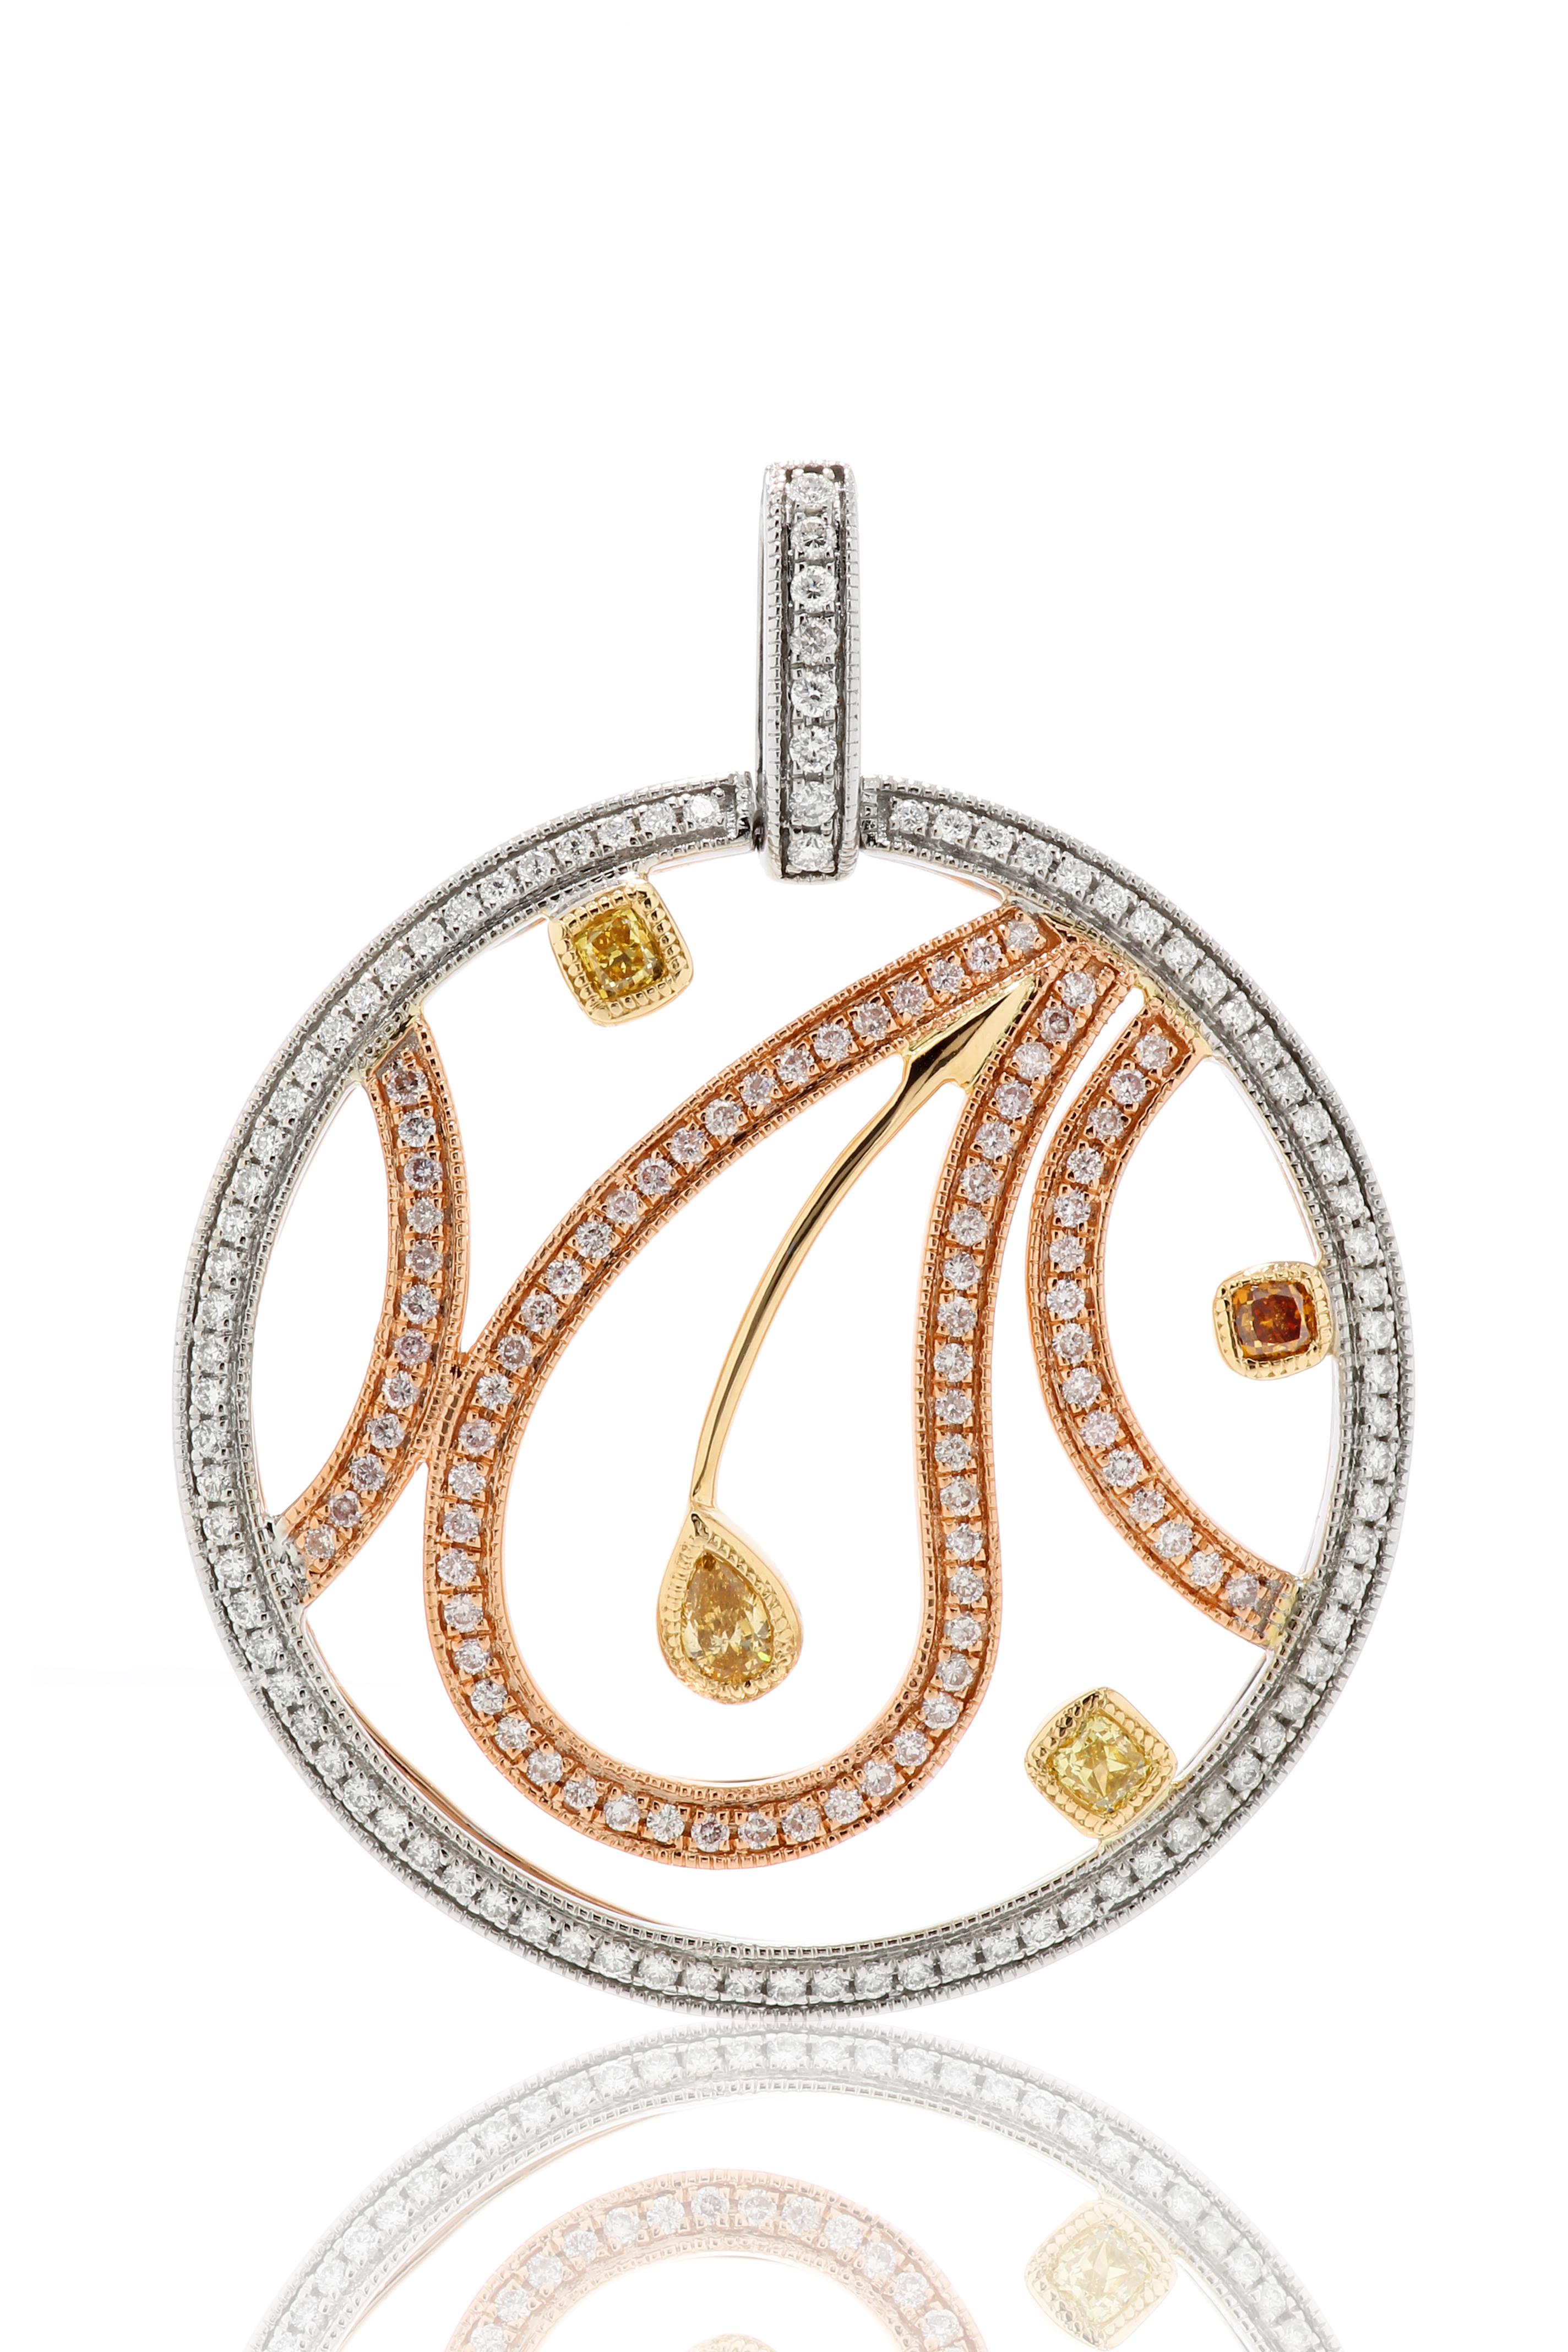 4 Natural Orange Yellow Mix Shape Diamonds 0.34 Carat Set with 80 Natural Fancy Pink Diamond Round 0.42 Carat and 89 White Round Brilliant Diamonds 0.34 Carat in Stunning 14K White, Yellow and Rose Gold Chain Drop Pendant Necklace.

Natural Orange